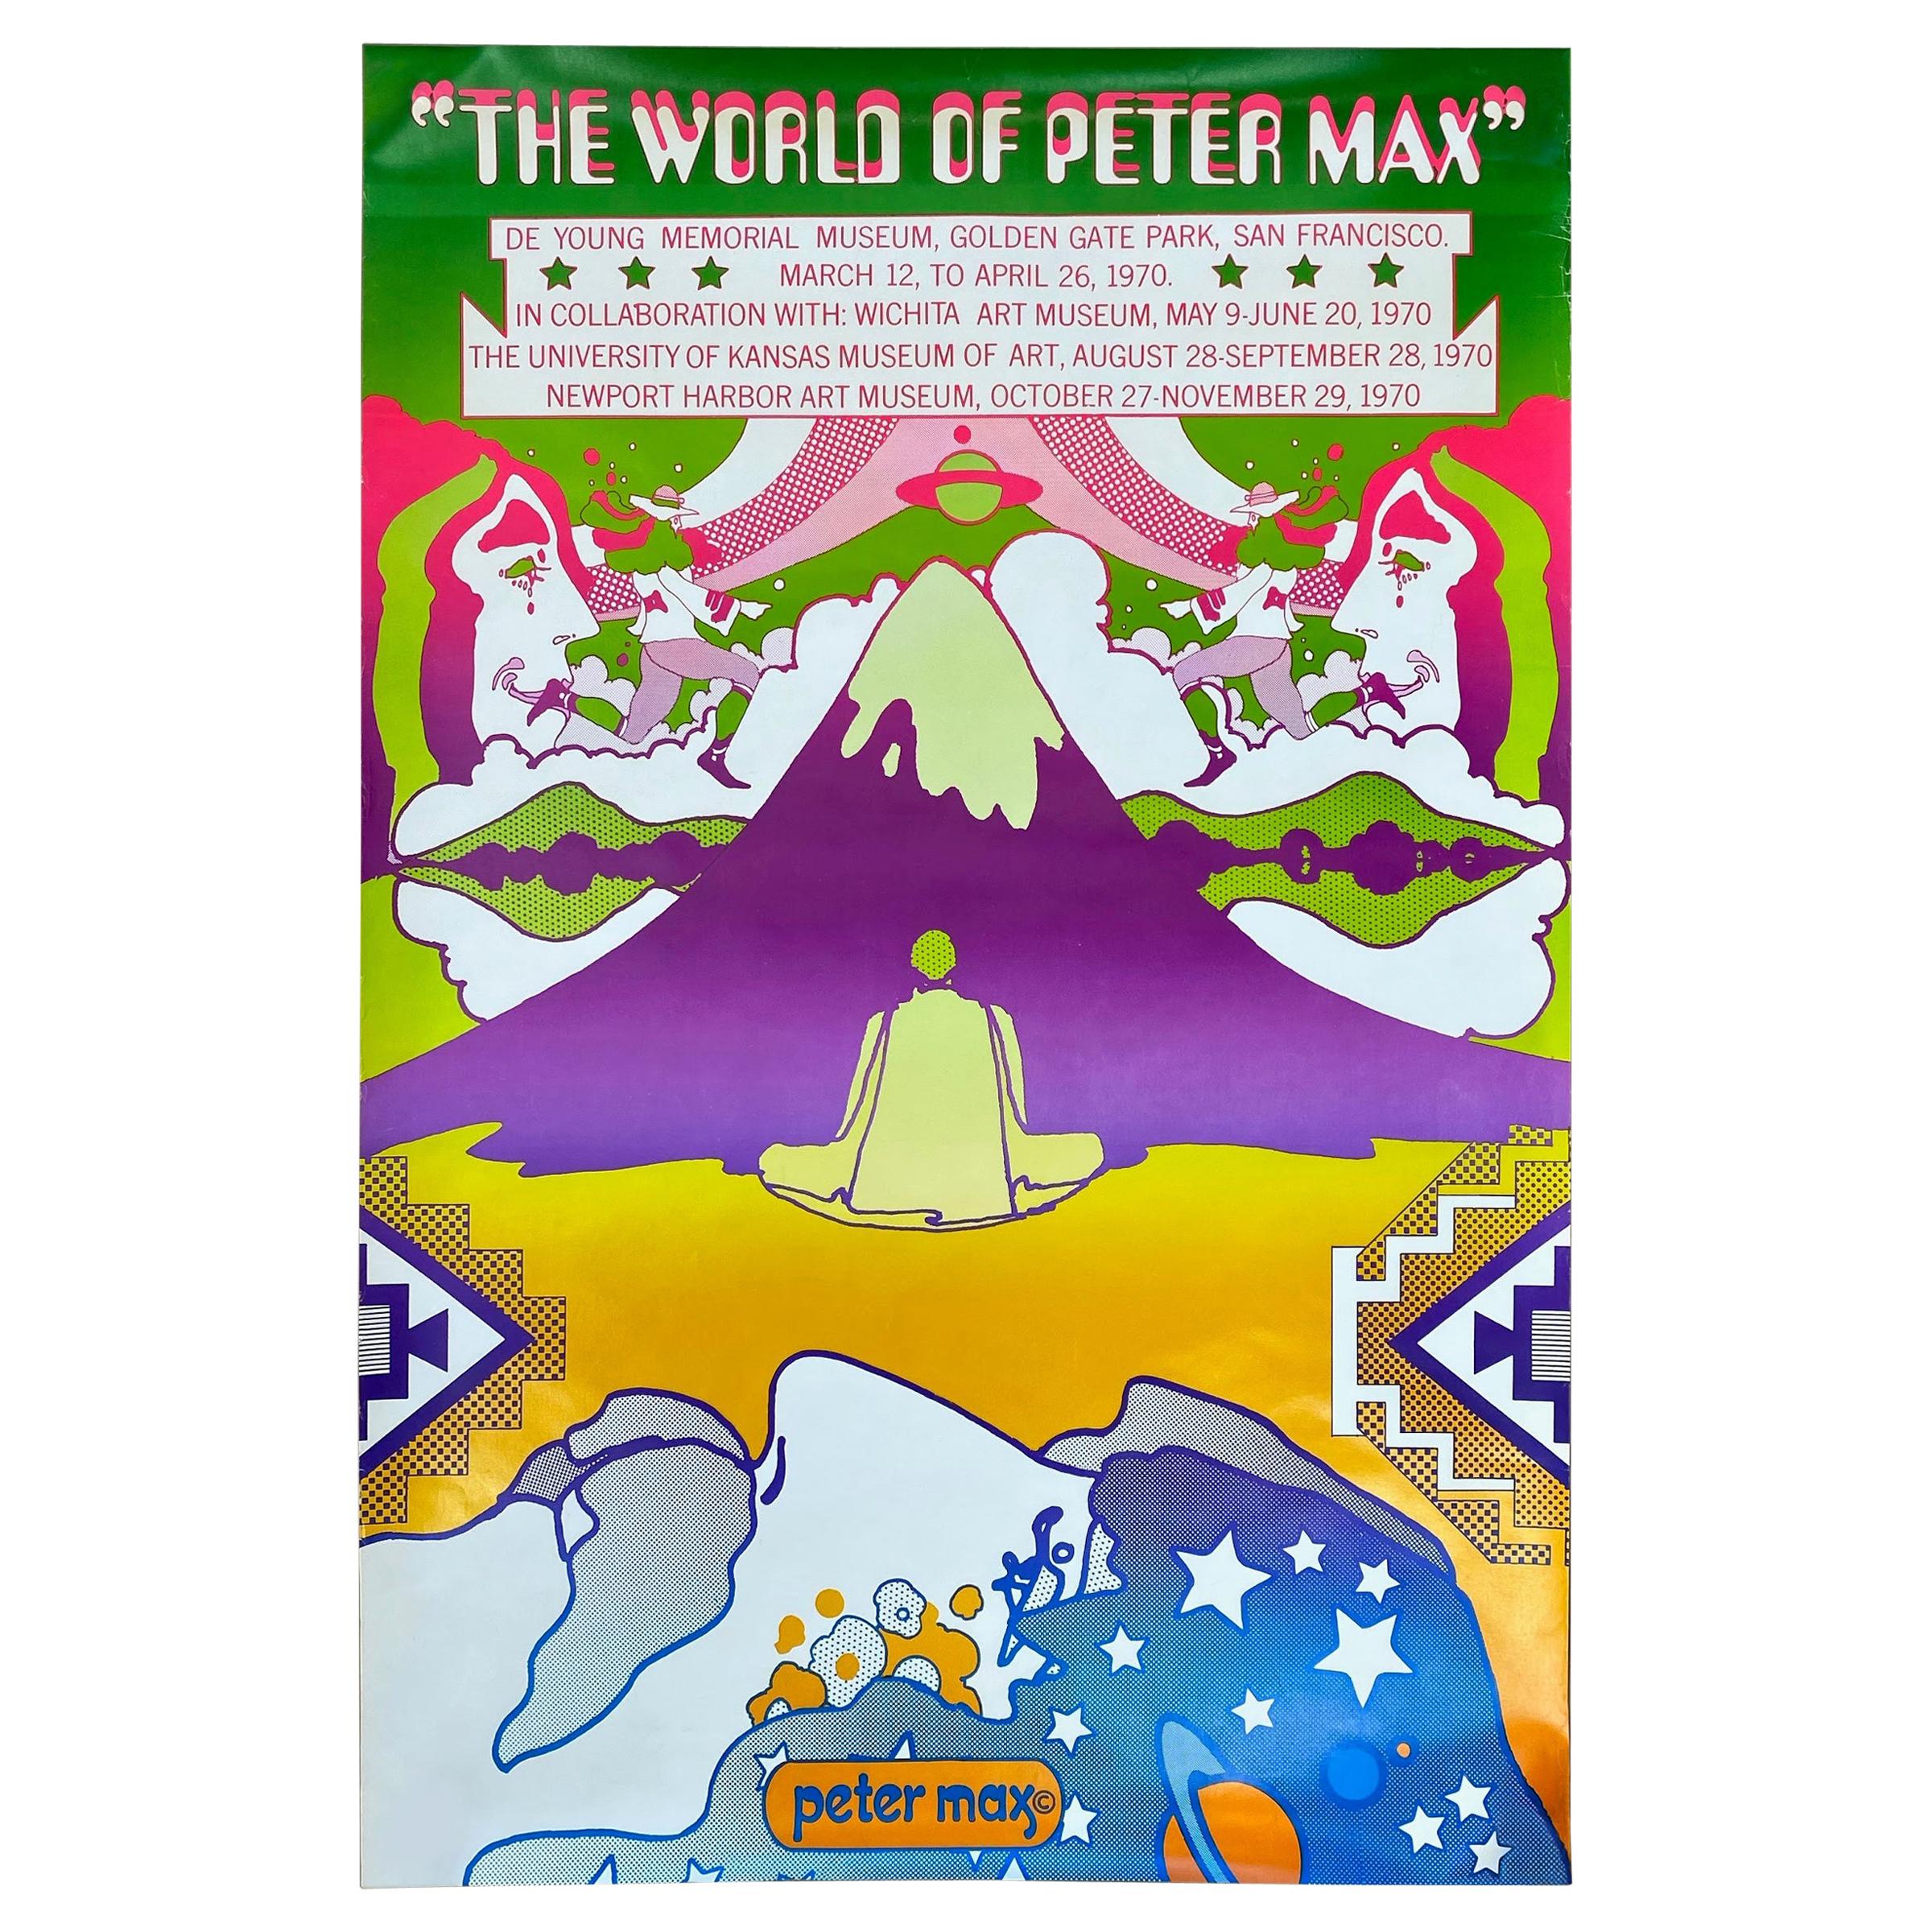 Peter Max “The World of Peter Max” Museum Exhibition Serigraph Poster ‘B', 1969